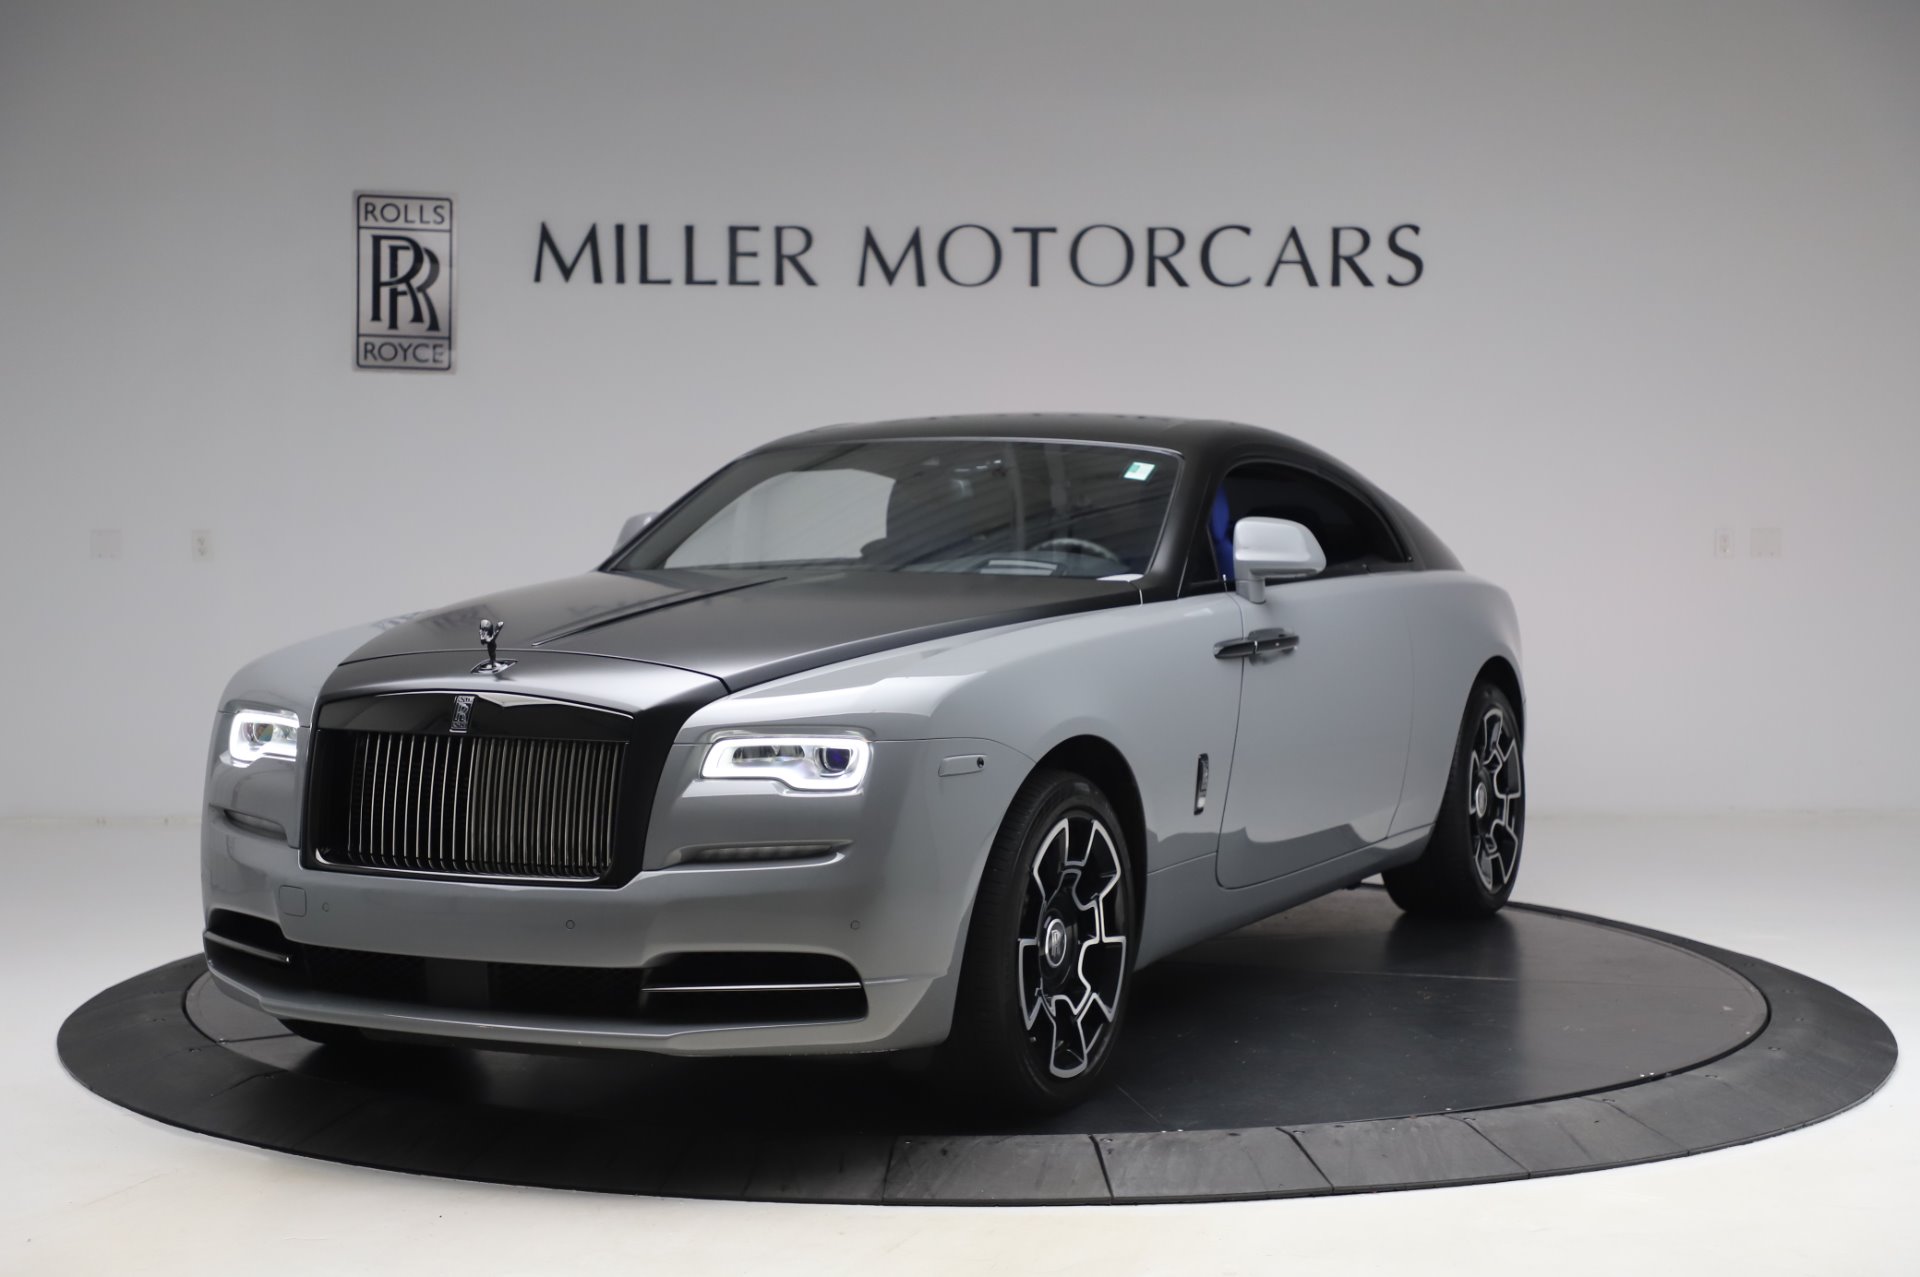 2017 RollsRoyce Wraith Review Trims Specs Price New Interior  Features Exterior Design and Specifications  CarBuzz